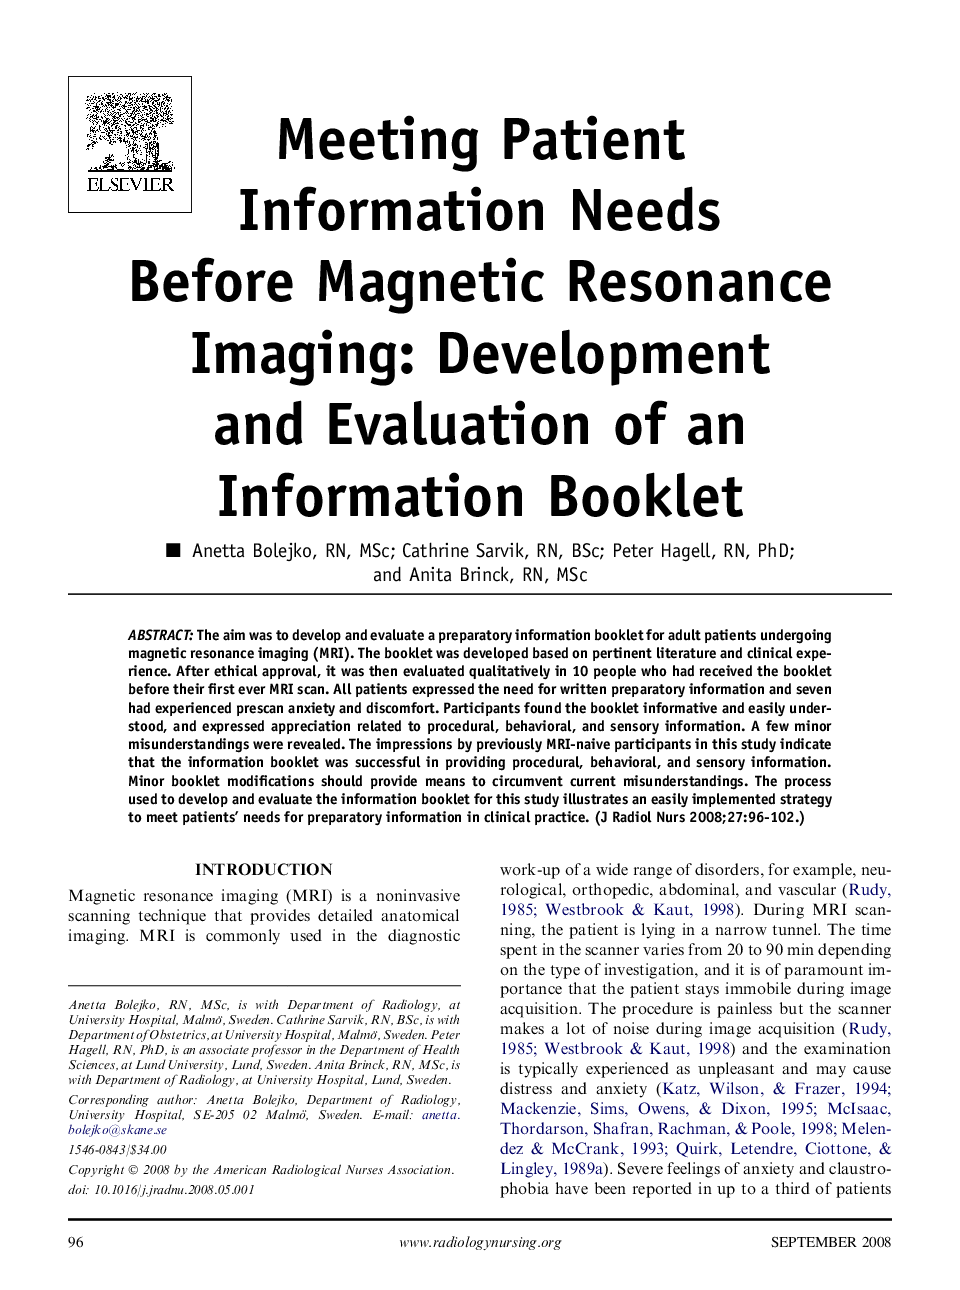 Meeting Patient Information Needs Before Magnetic Resonance Imaging: Development and Evaluation of an Information Booklet